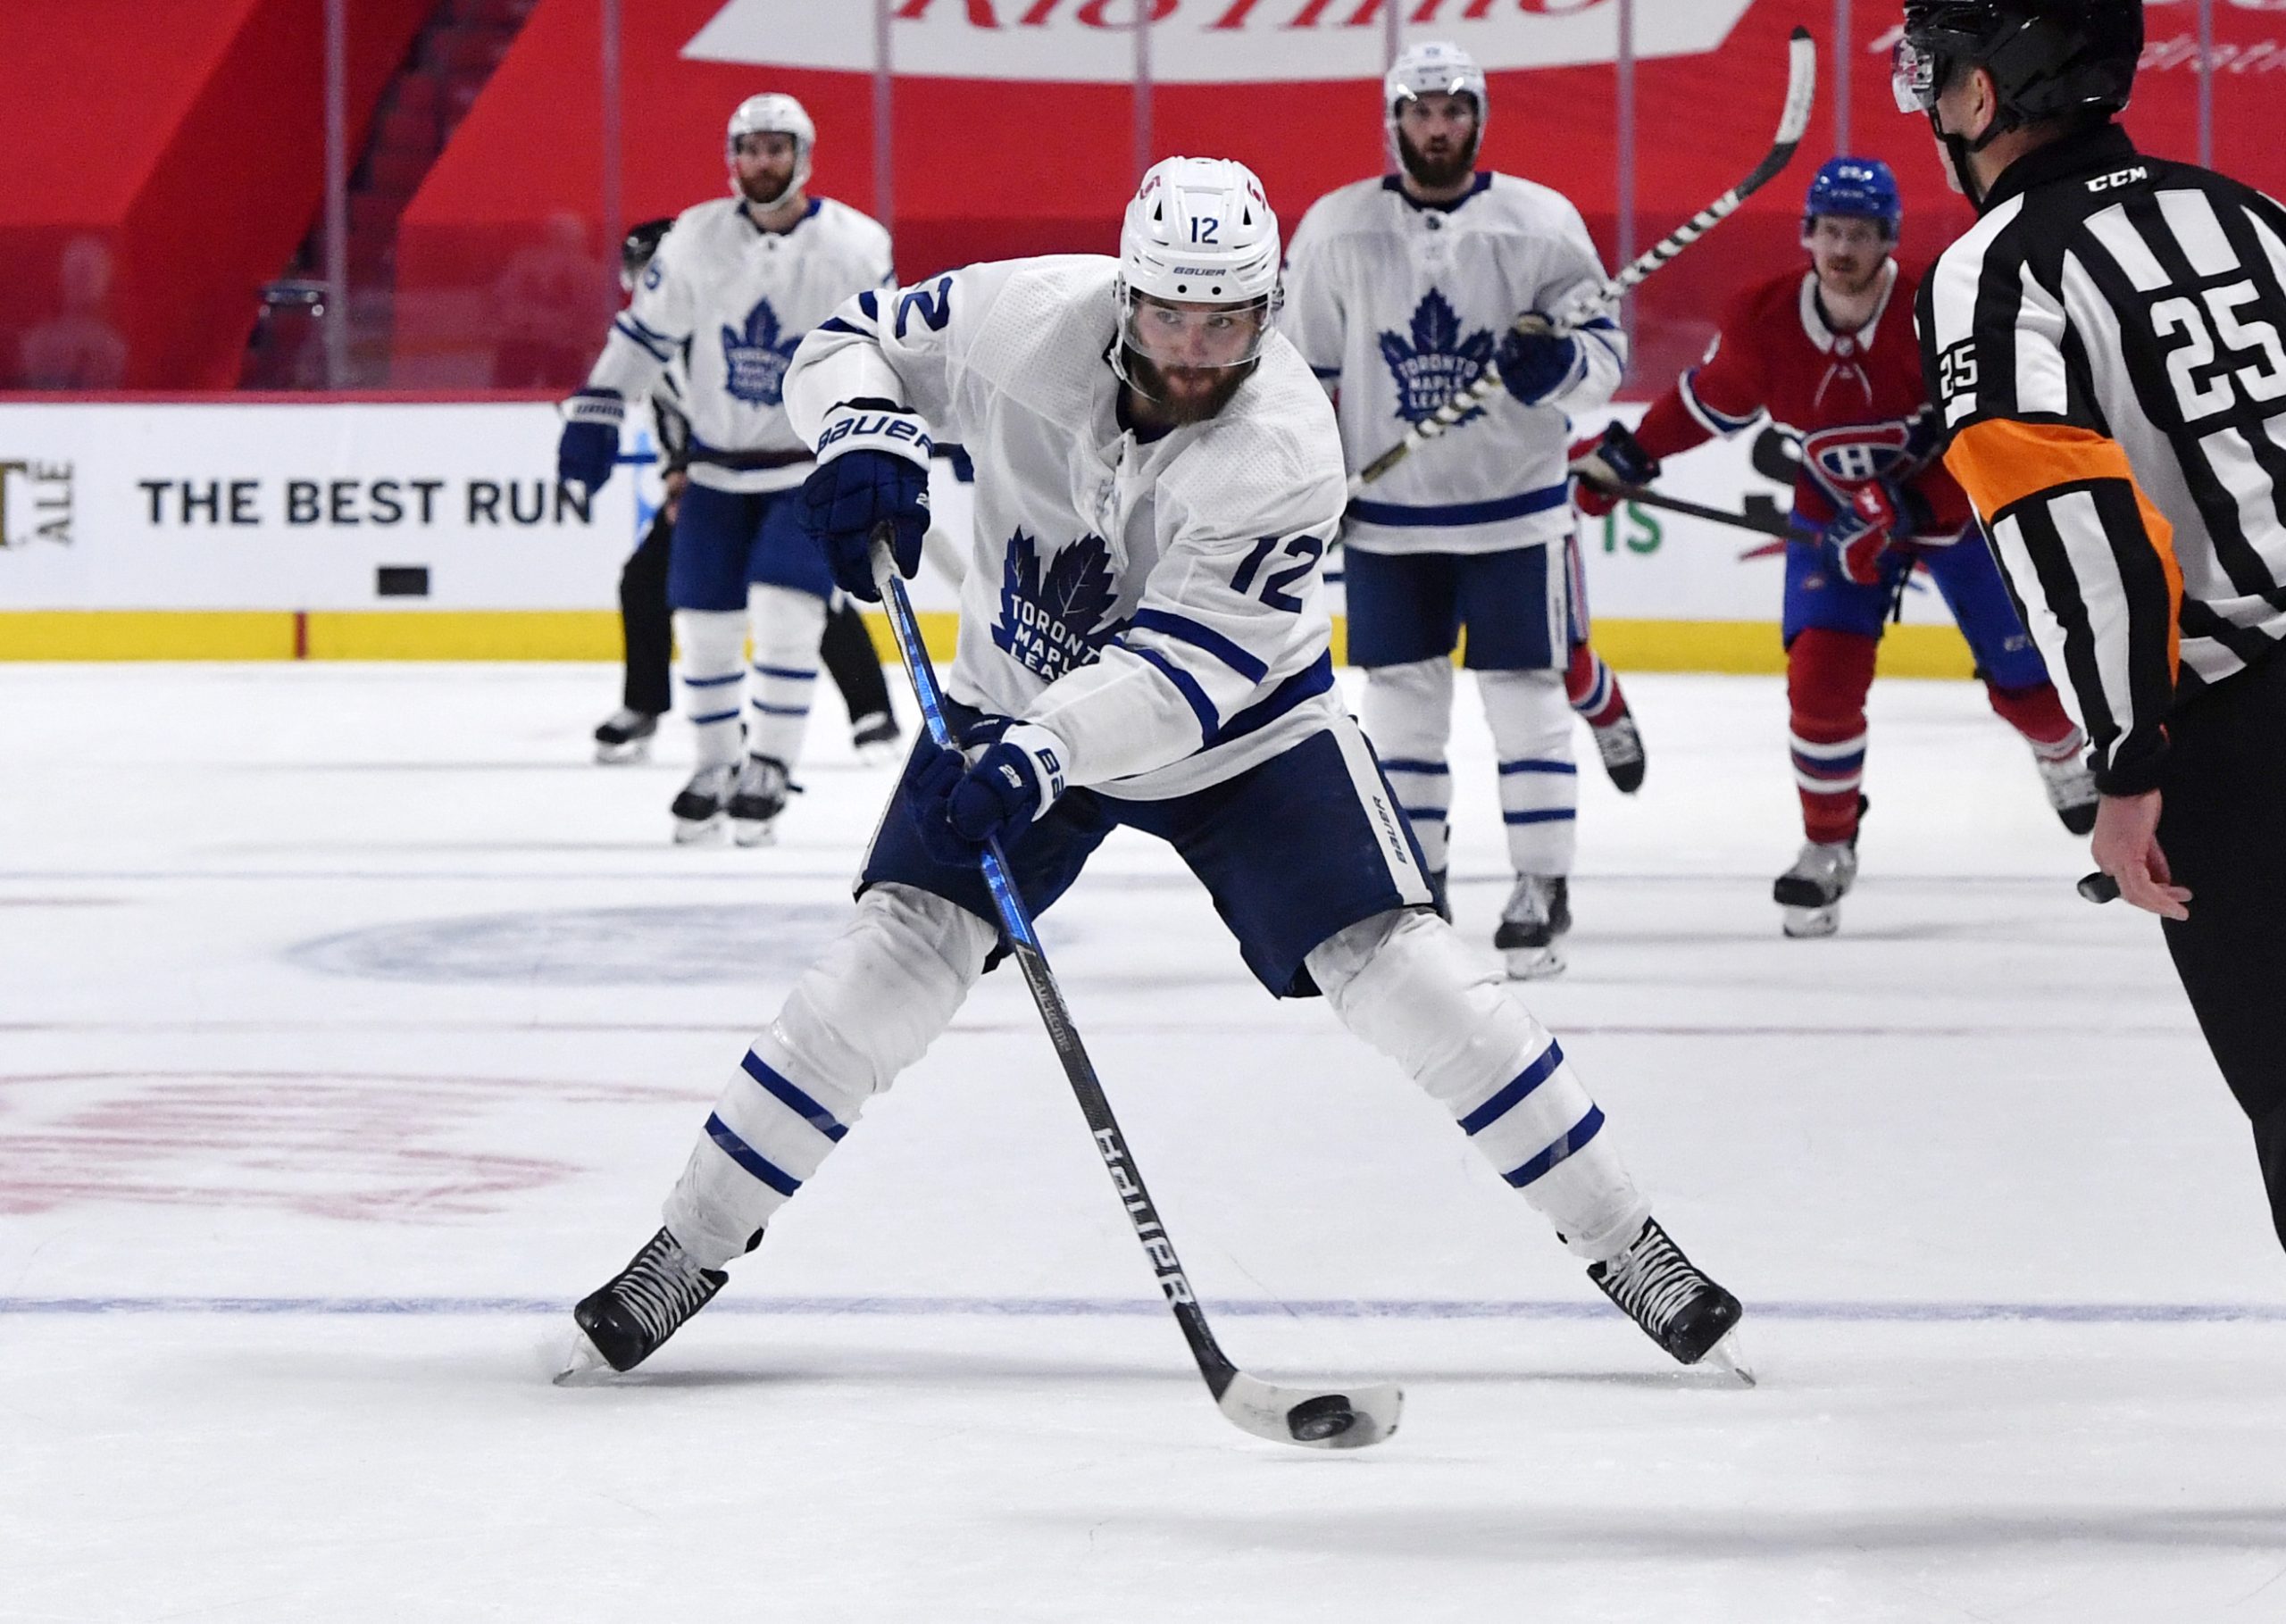 NHL: Stanley Cup Playoffs-Toronto Maple Leafs at Montreal Canadiens